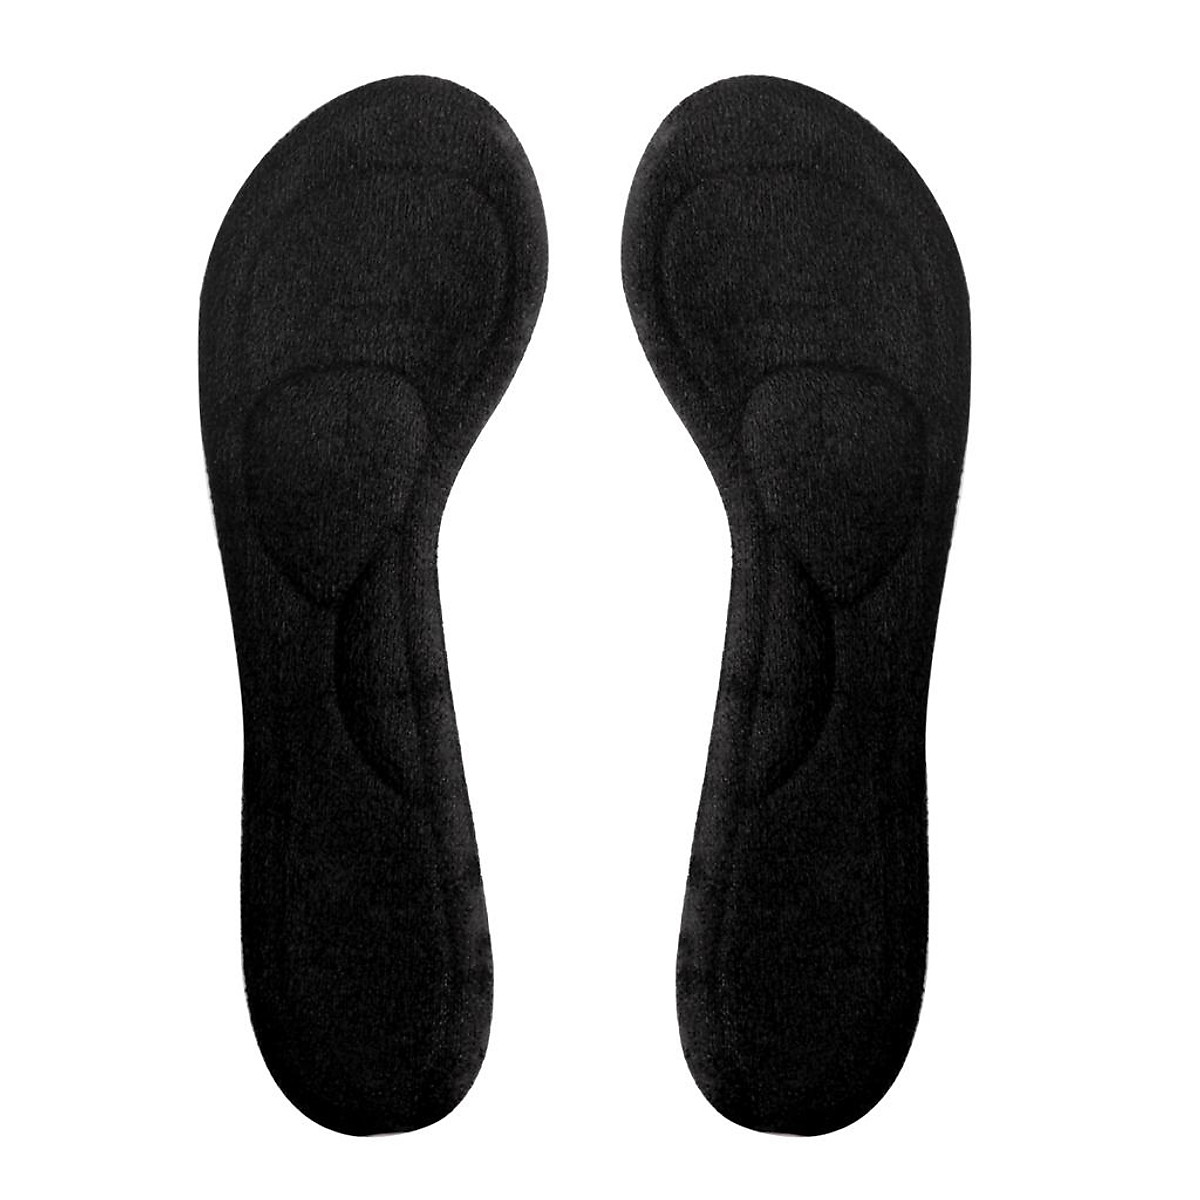 Buy Dr Foot Gel Insoles Pair|For Walking, Running, Sports,Formal & Safety  Shoes|All Day Comfort Shoe Inserts with Dual Gel Technology |Ideal  Full-Length Sole| For Both Men & Women - 1 Pair Online